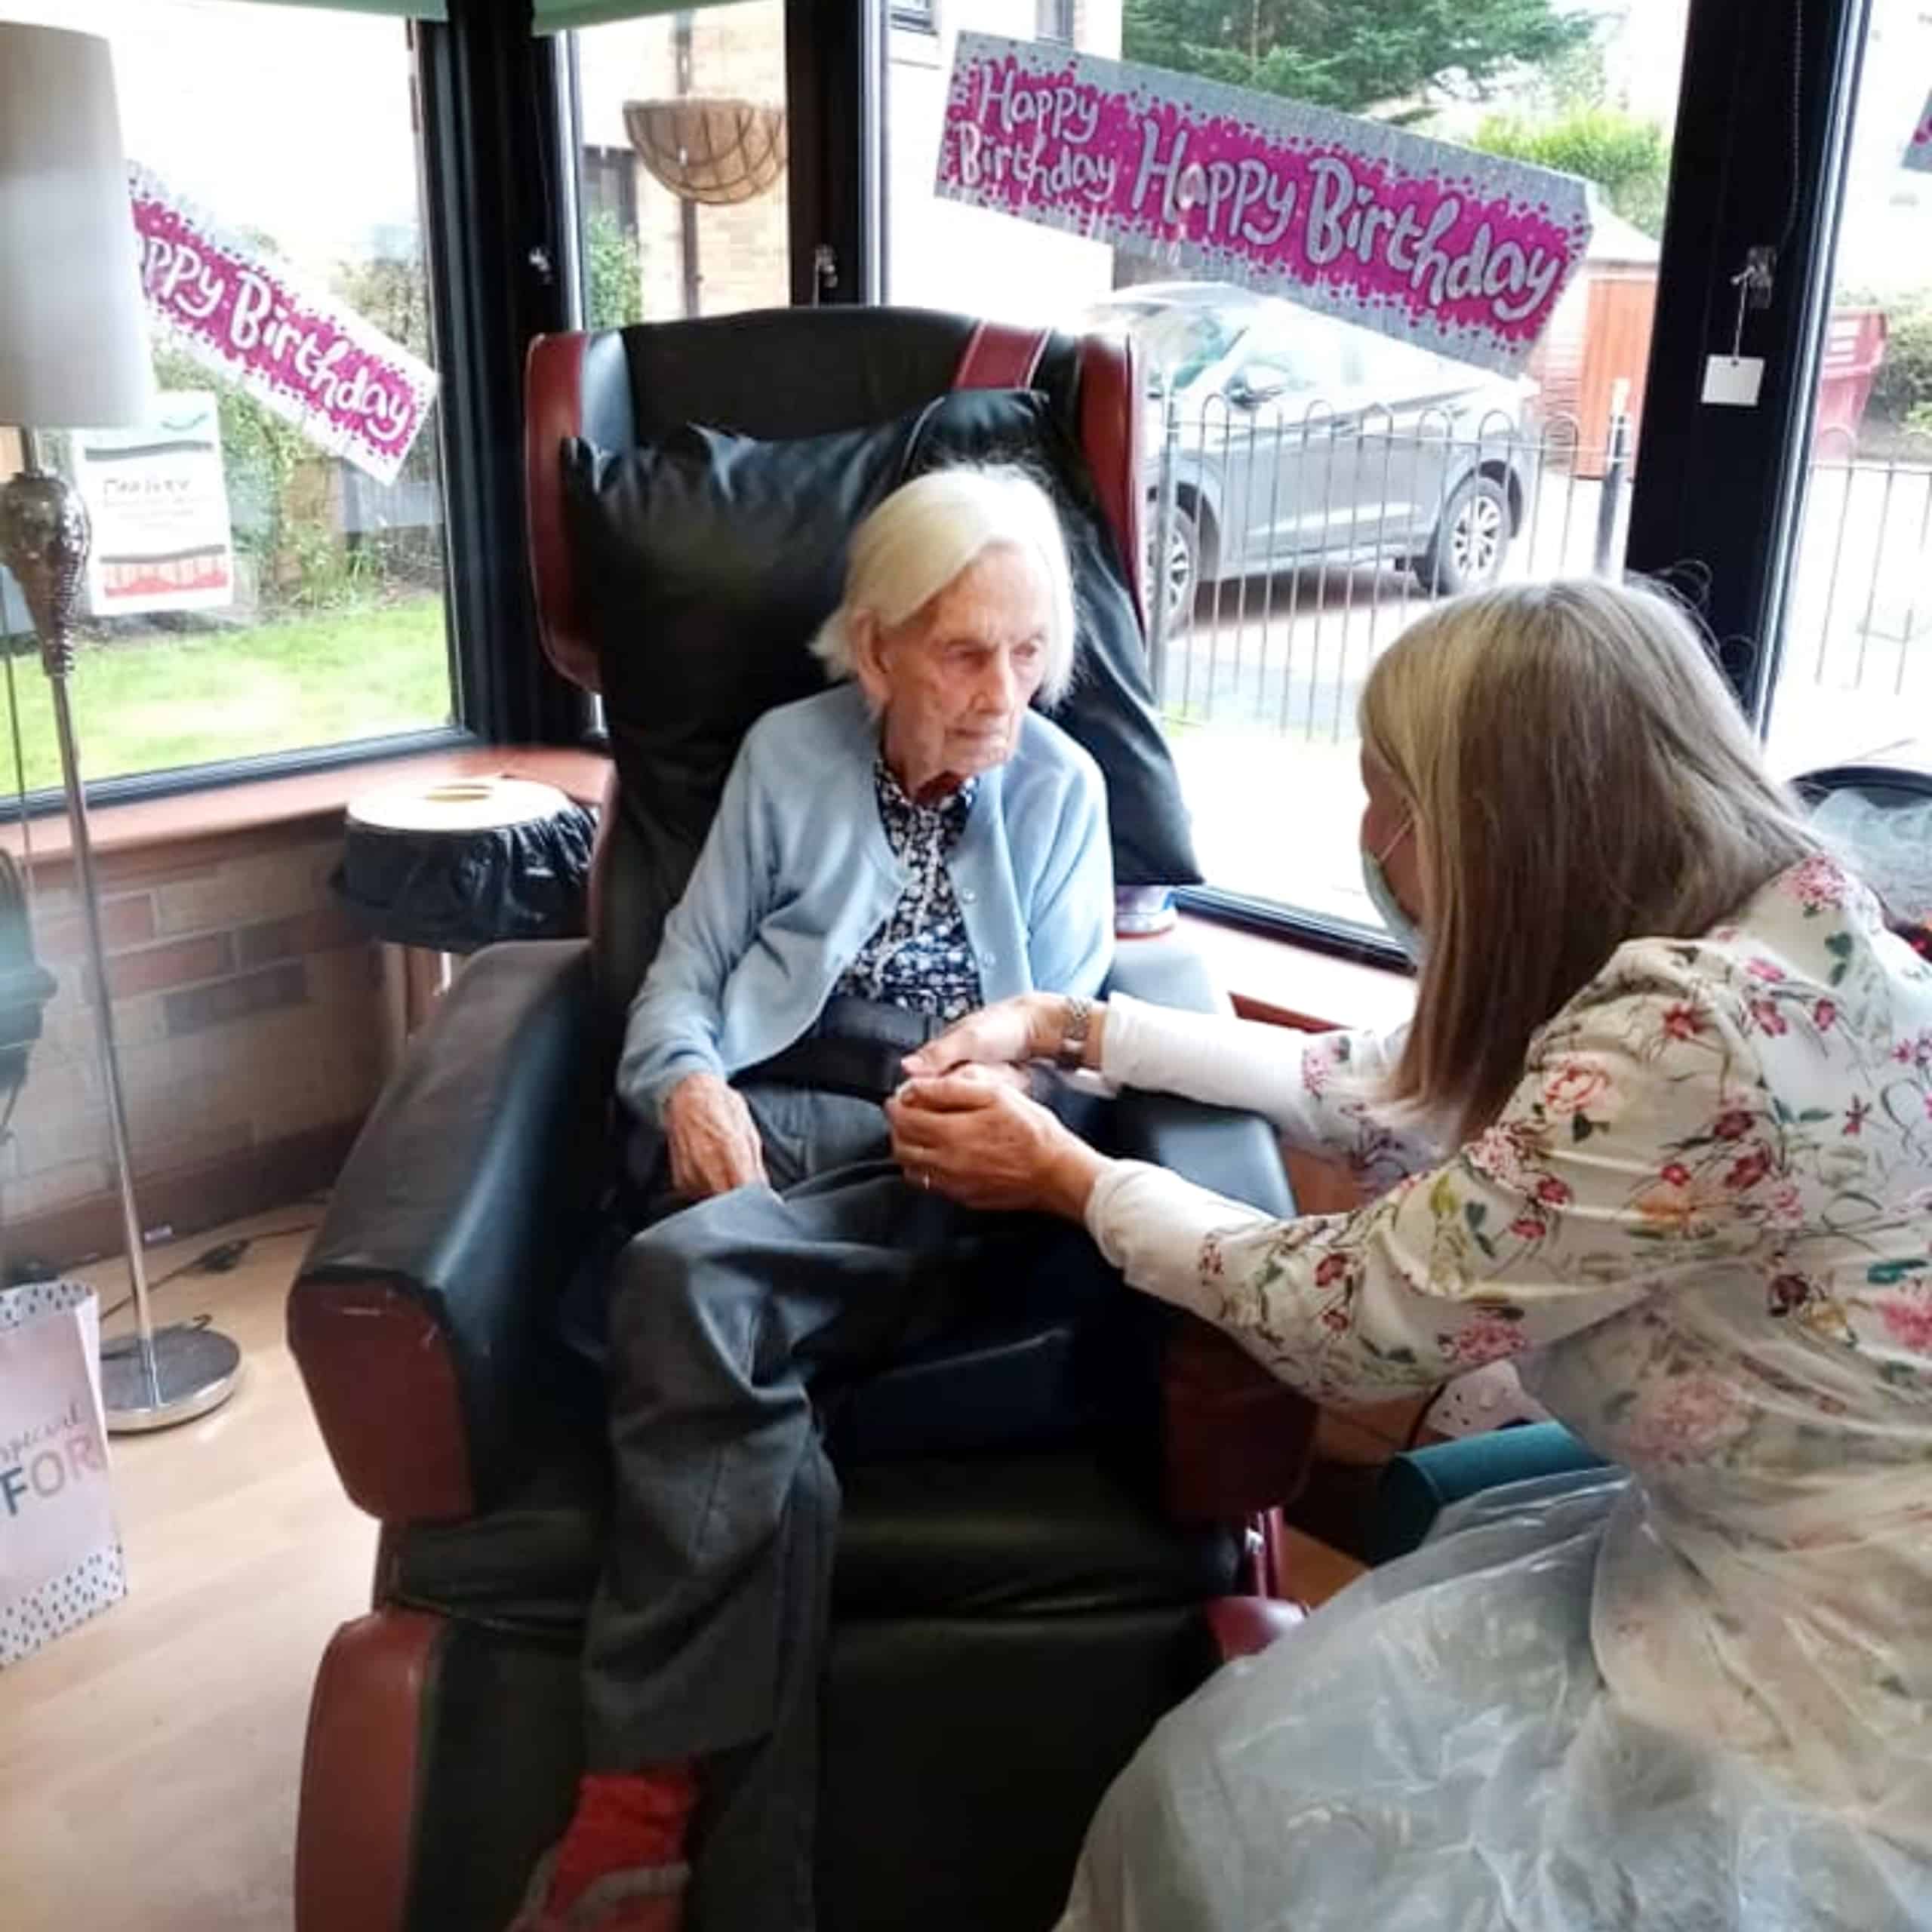 Eastwood Court Care Home resident Marjory Drysdale enjoying her first visit with her daughter Rhona Crosbie on her 101st birthday.